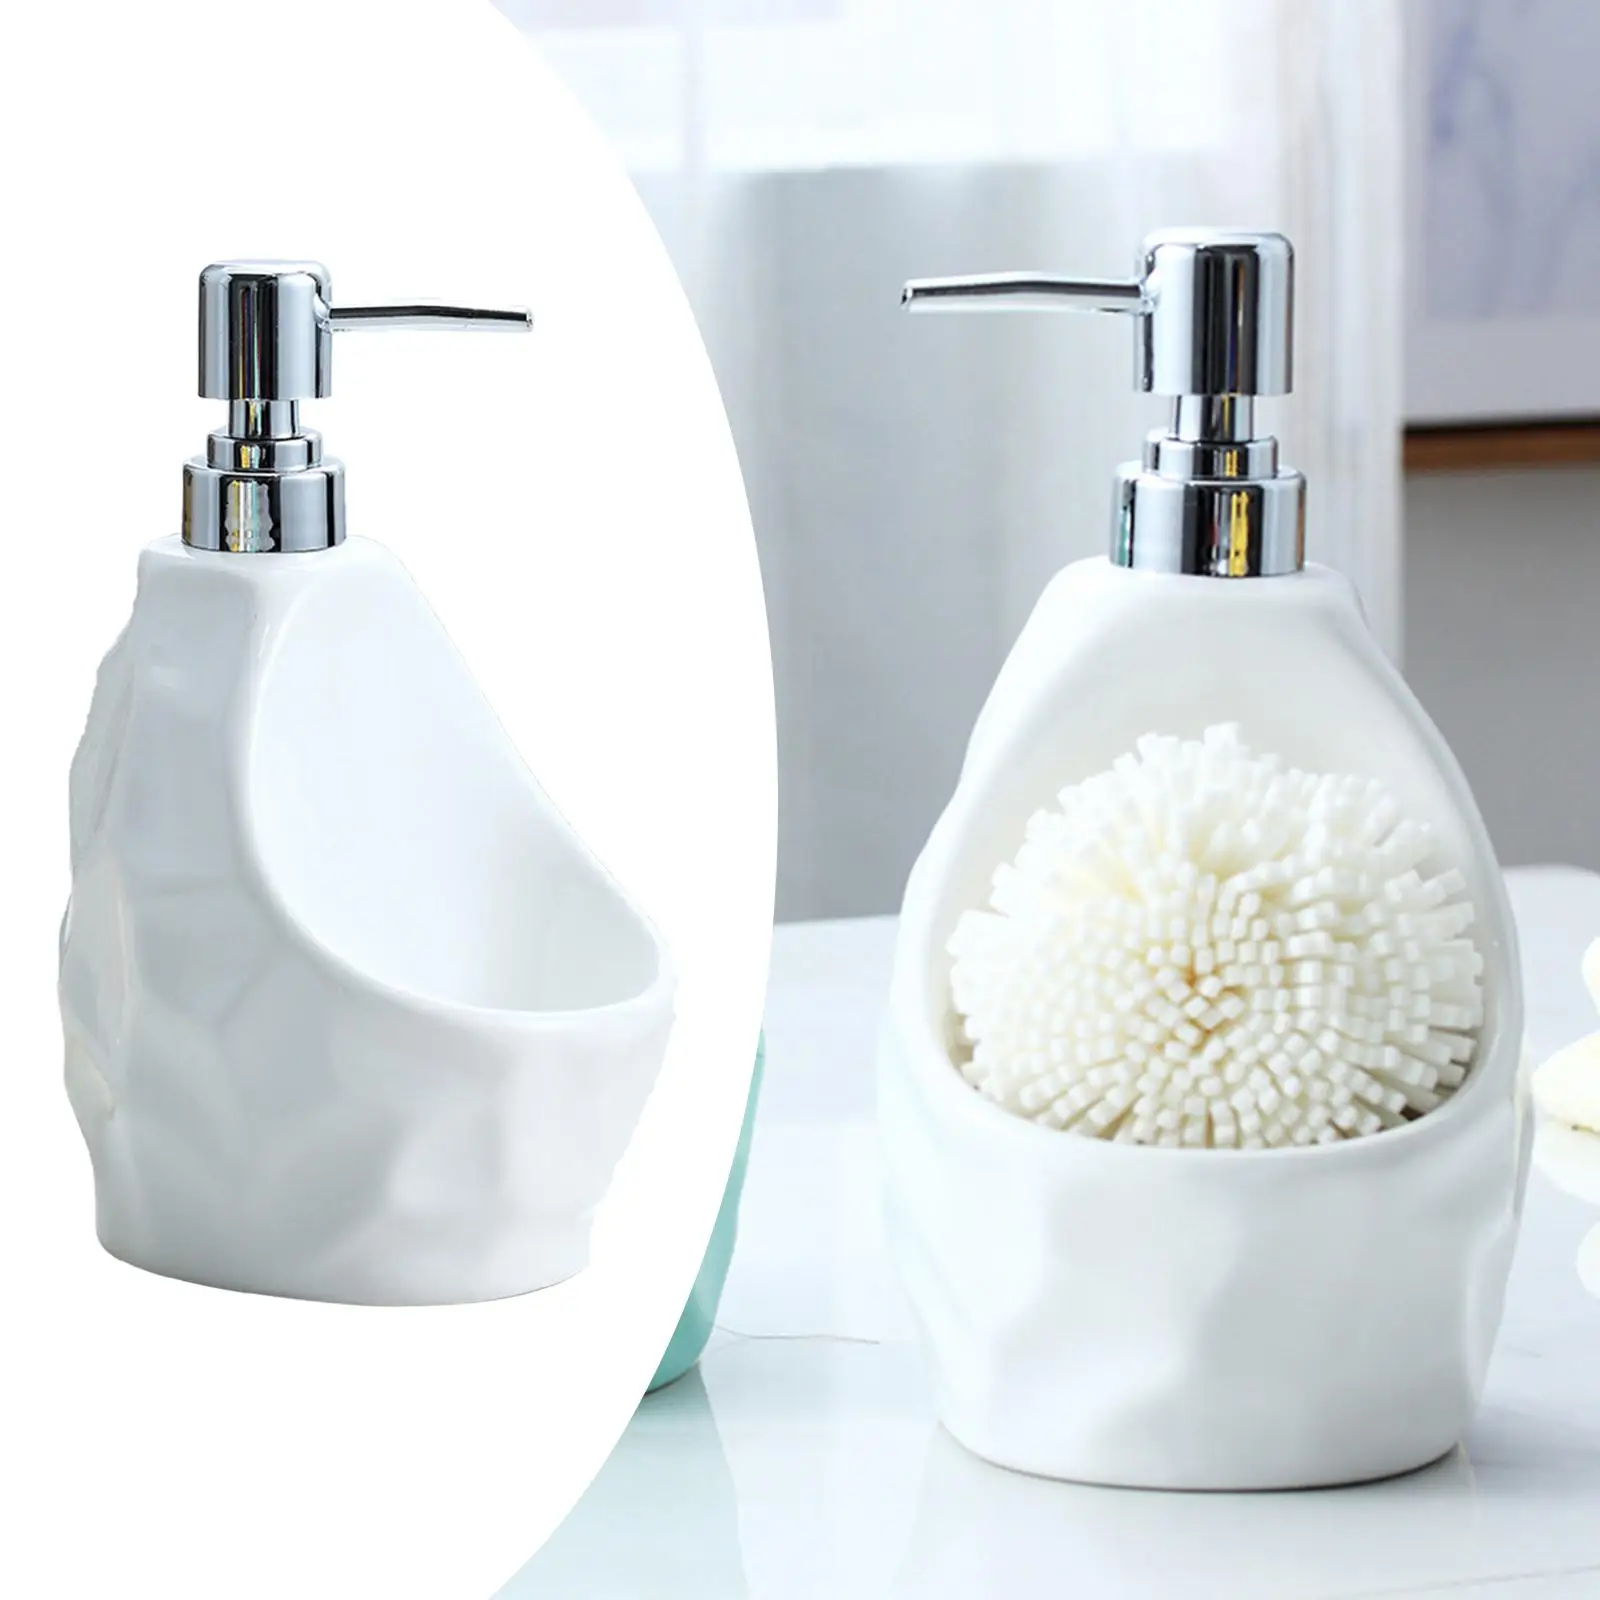 Soap Dispenser Lotion Dispensers Empty Modern Ceramic Container Holder for Body Wash Dish Soap Soap Sink Countertop Restroom